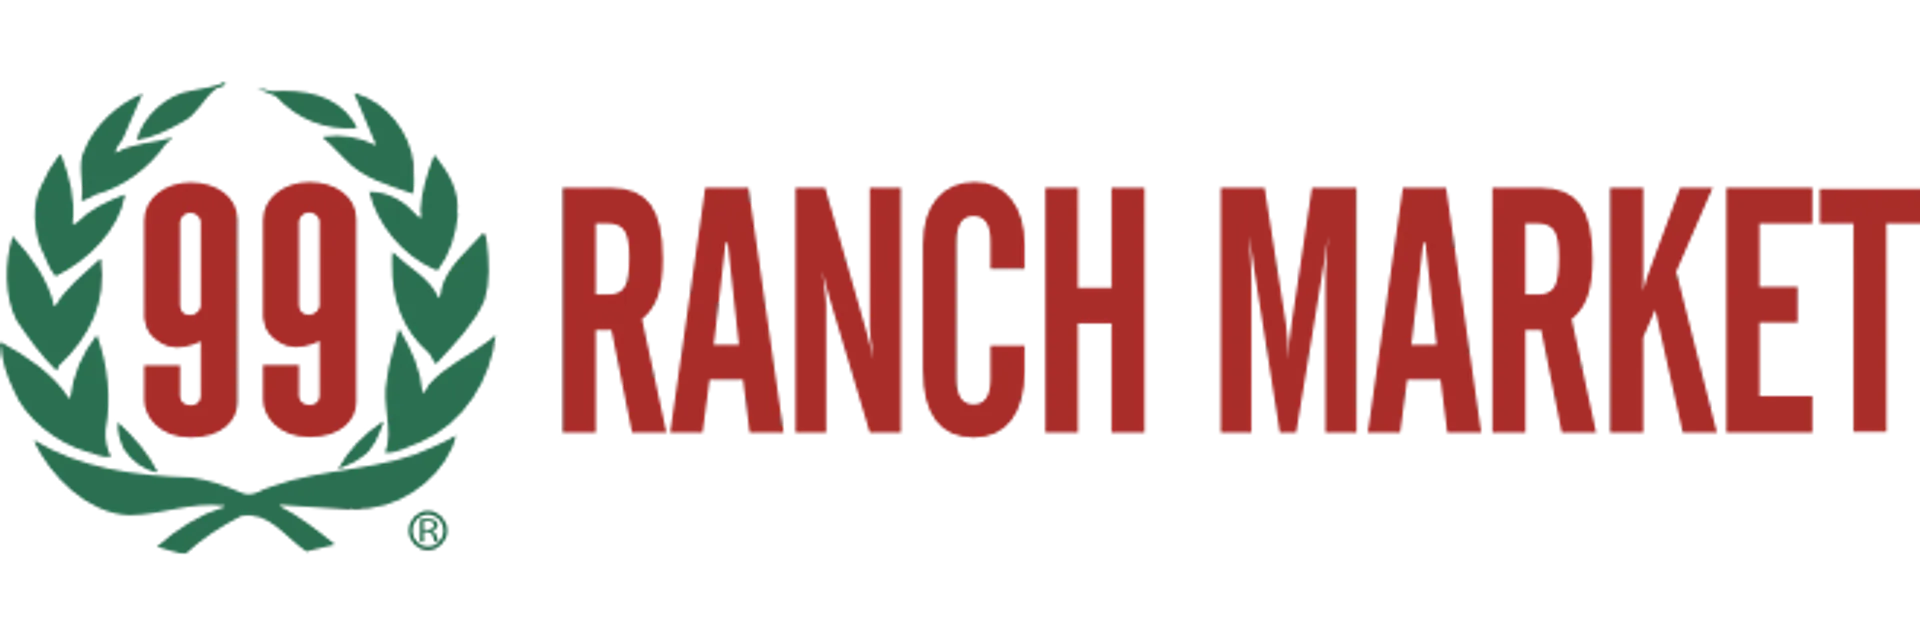 99 RANCH MARKET logo current weekly ad